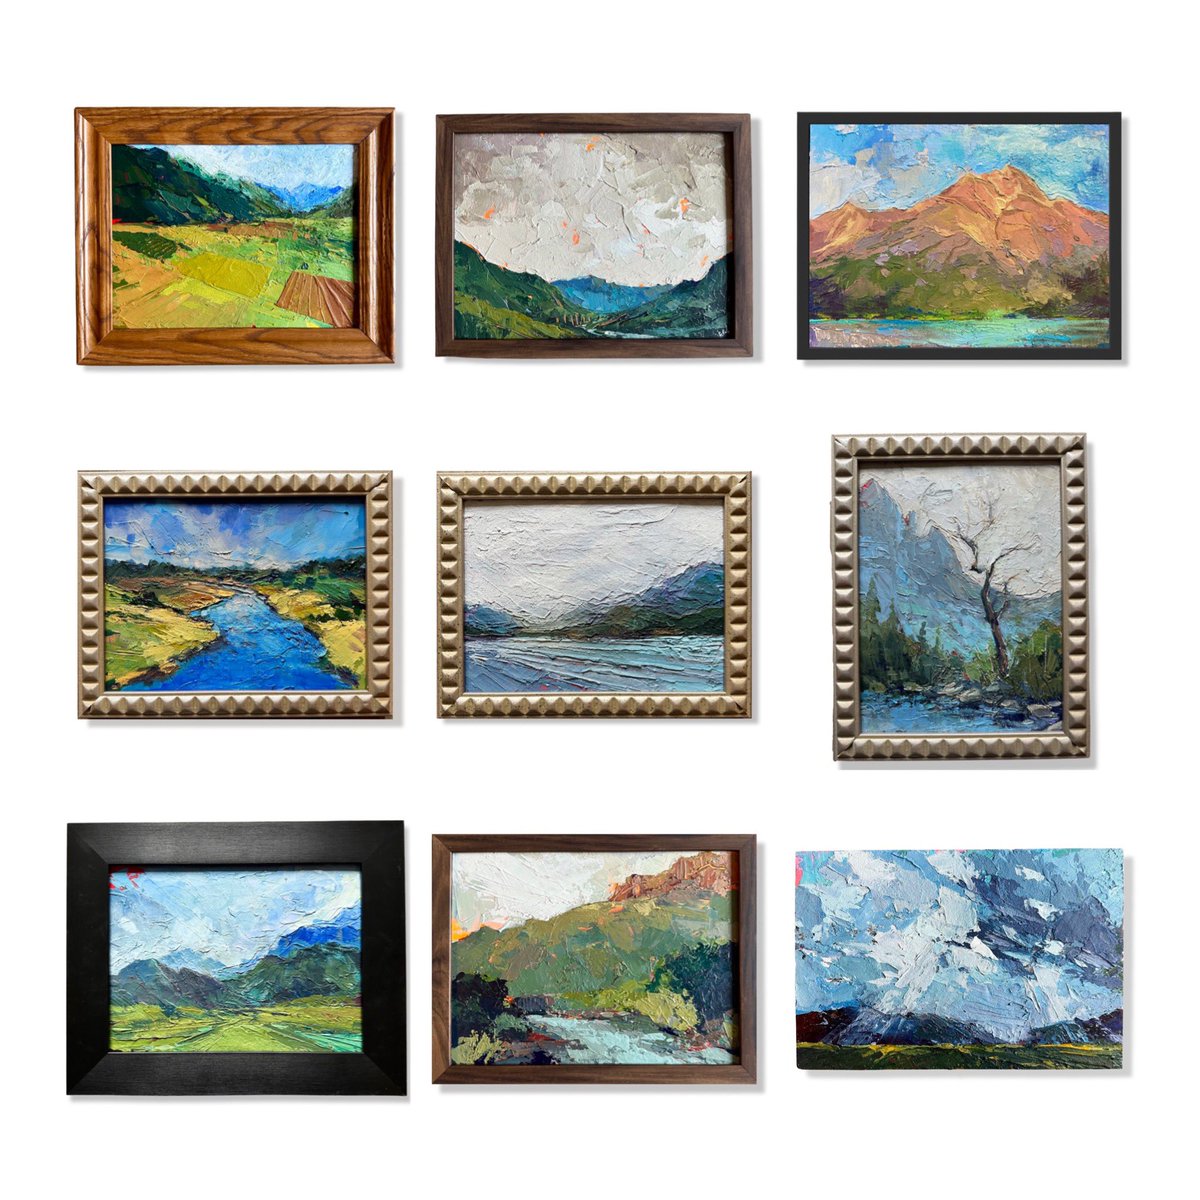 And my plein air collection is live! Shop these gorgeous original artworks at samanthawilliamschapelsky.shop/collections/th… #yeg #yegart #colorado #coloradoart #yyc #yycart #edmontonartist #edmonton #painting #contemporarypainting